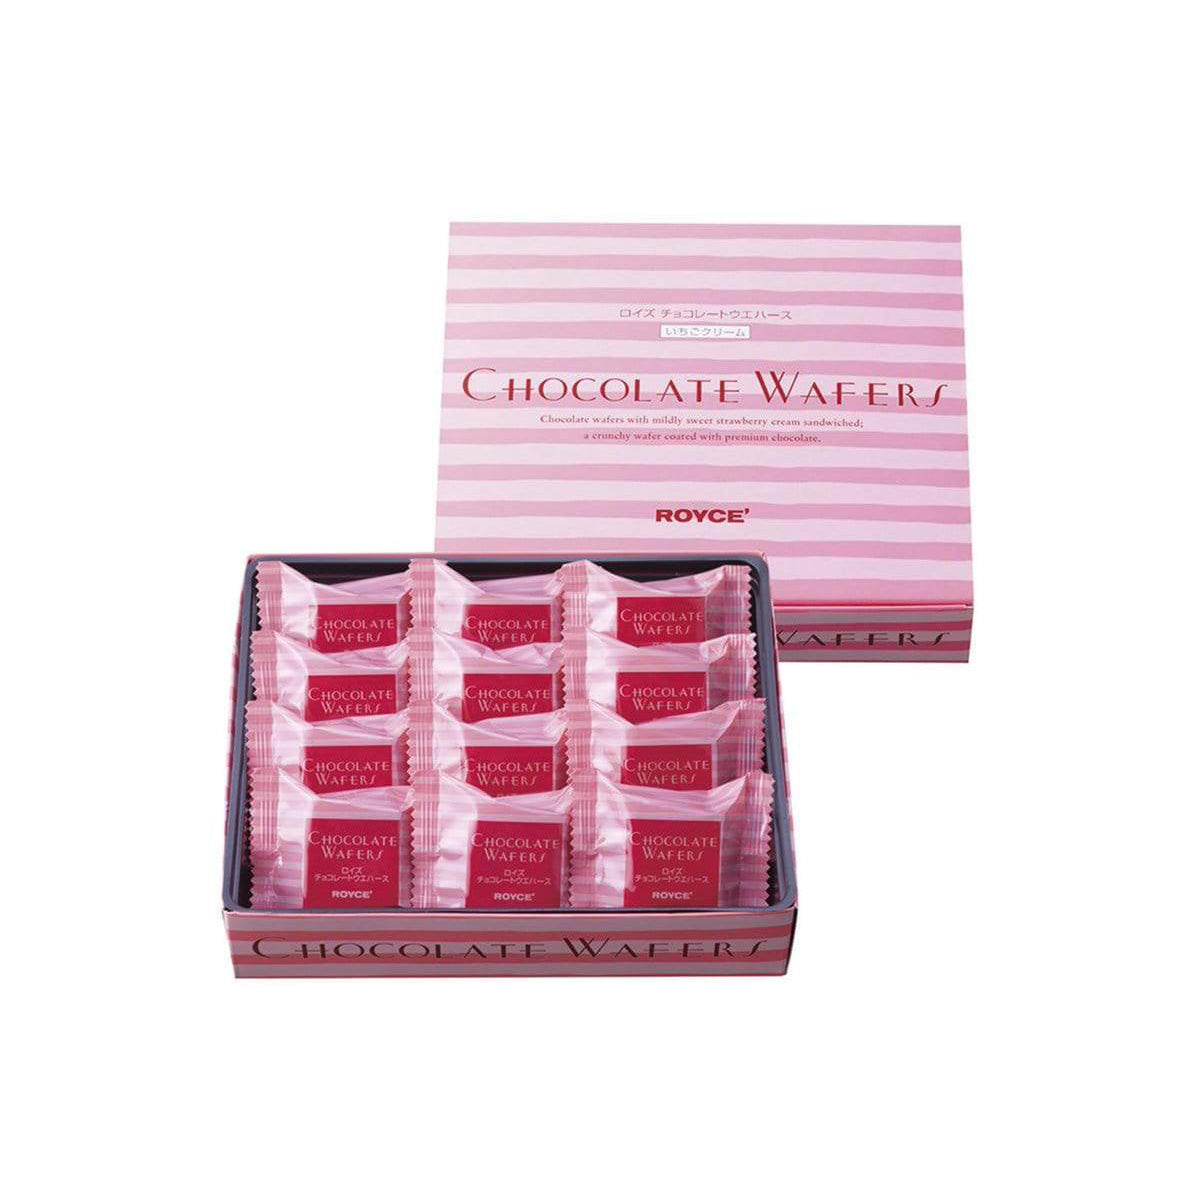 ROYCE' Chocolate - Chocolate Wafers "Strawberry Cream" - Image on top shows a pink striped box. Red text says Chocolate Wafers Chocolate wafers with mildly sweet strawberry cream sandwiched; a crunchy wafer coated with premium chocolate. ROYCE'. Text on the bottom part says Chocolate Wafers. Below is a pink box filled with individually-wrapped wafers with pink striped wrapper. Red text on each says Chocolate Wafers ROYCE'. Red text on the bottom part says Chocolate Wafers.